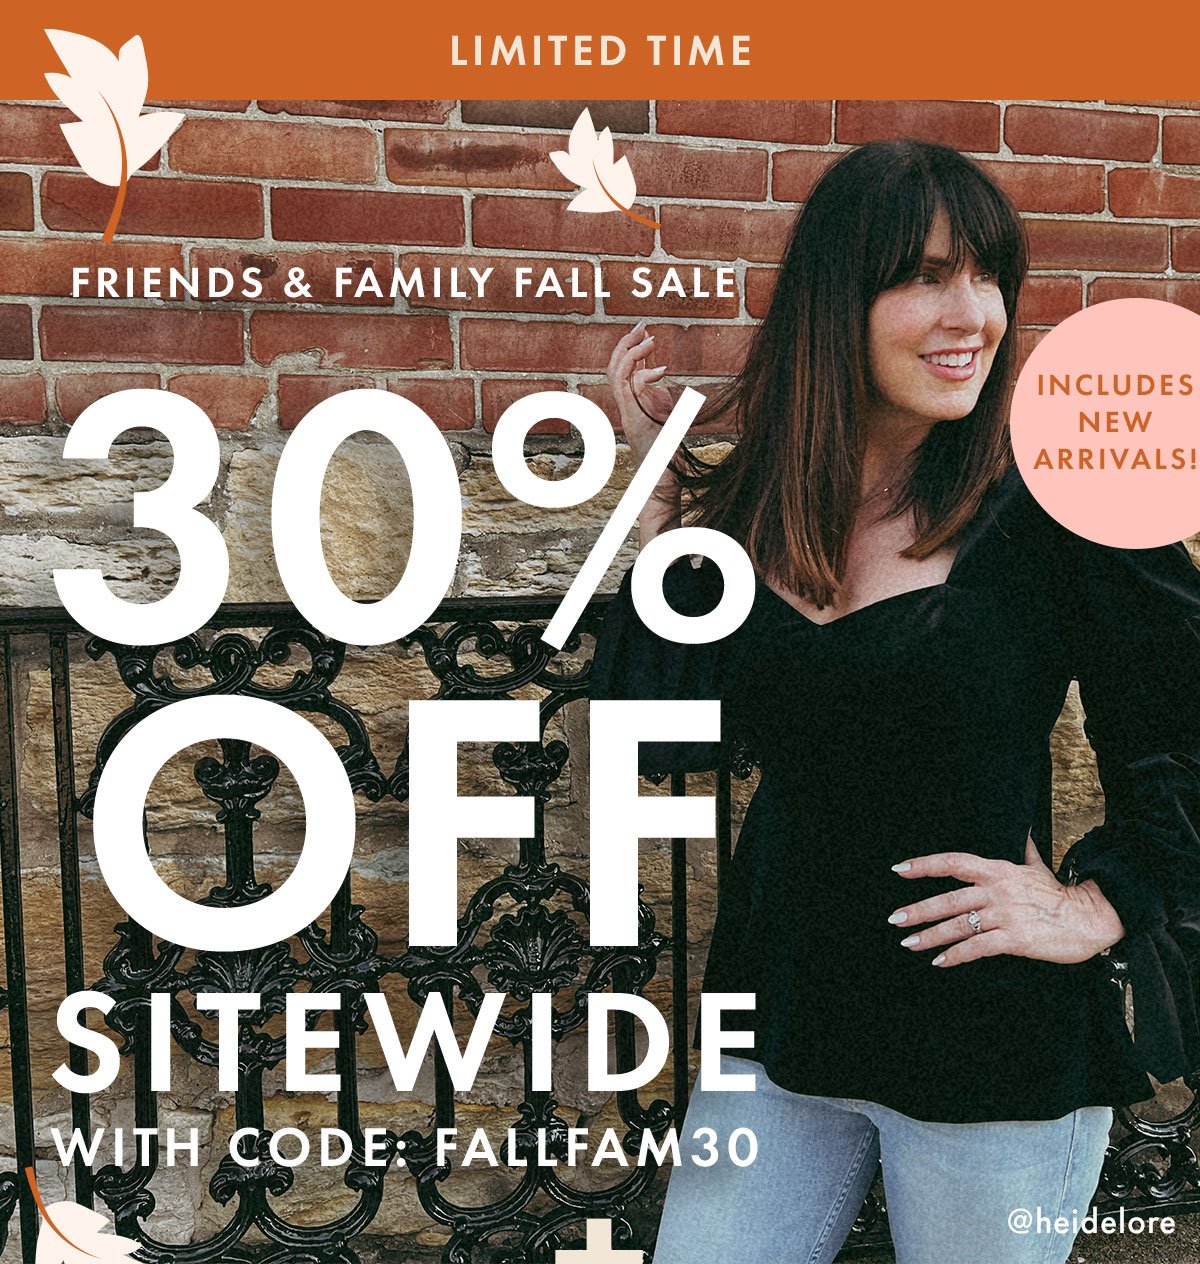 Friends & Family Fall Sale | 30% Off Sitewide with Code: FALLFAM30